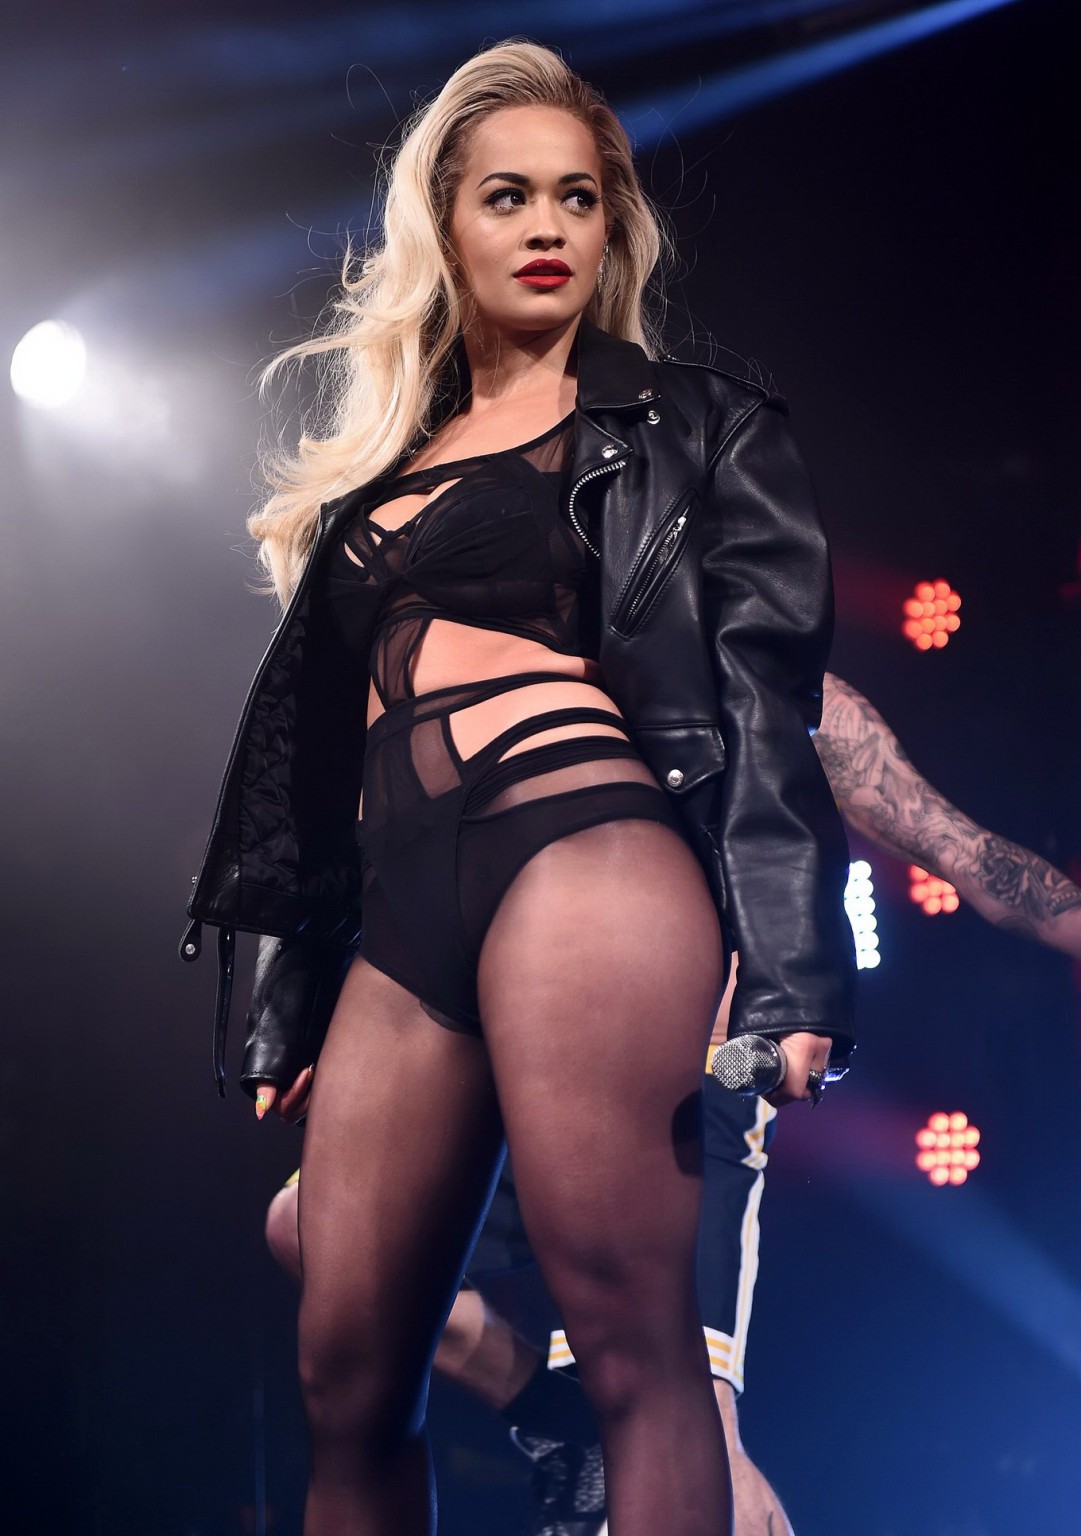 Rita Ora shows off her ass and cleavage in black bodysuit #75160108